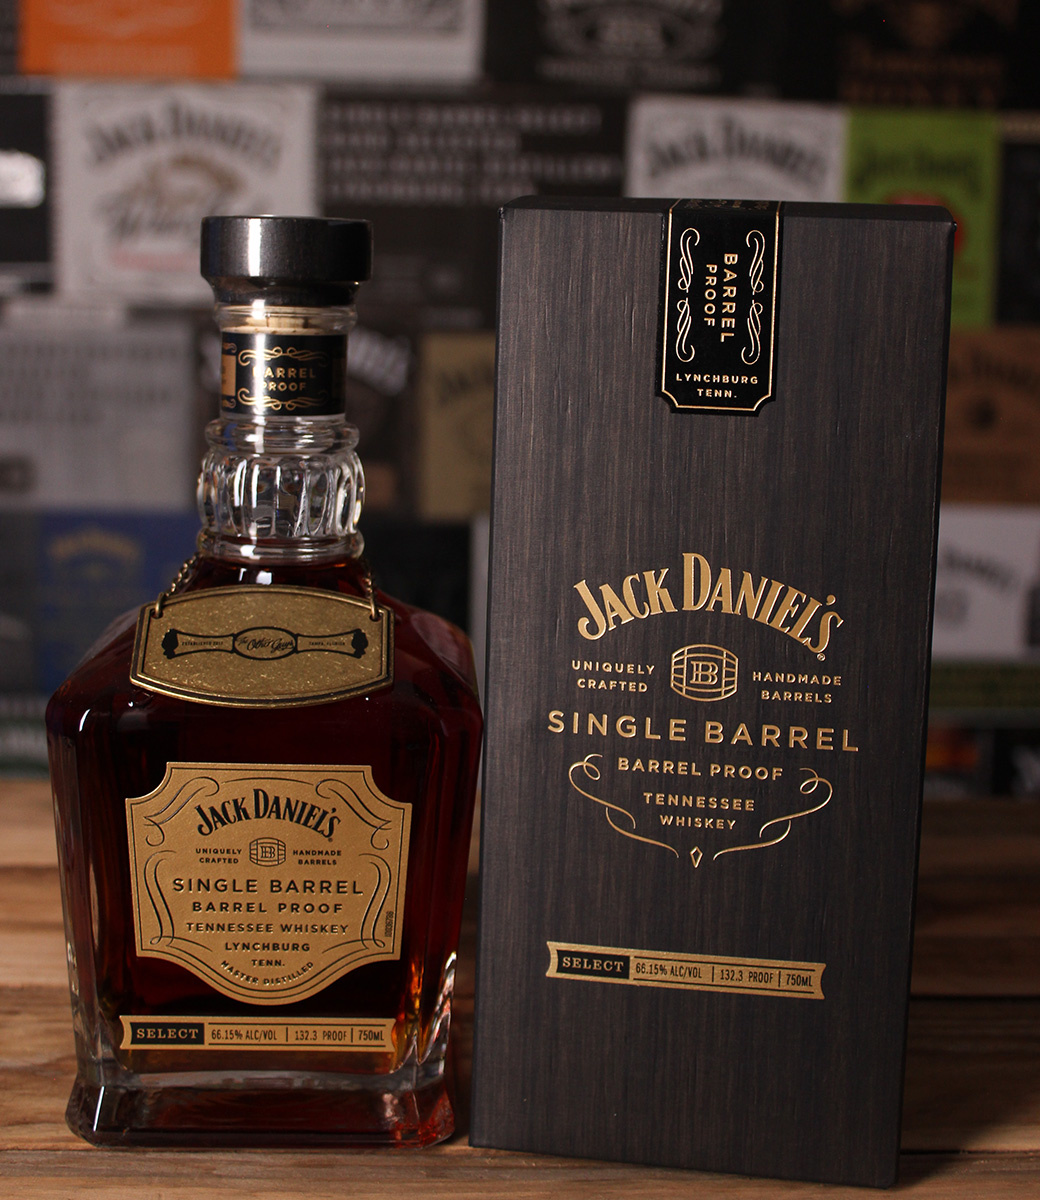 JACK DANIEL'S - Single Barrel - Barrel Proof - Personal Collection - The Other Guys